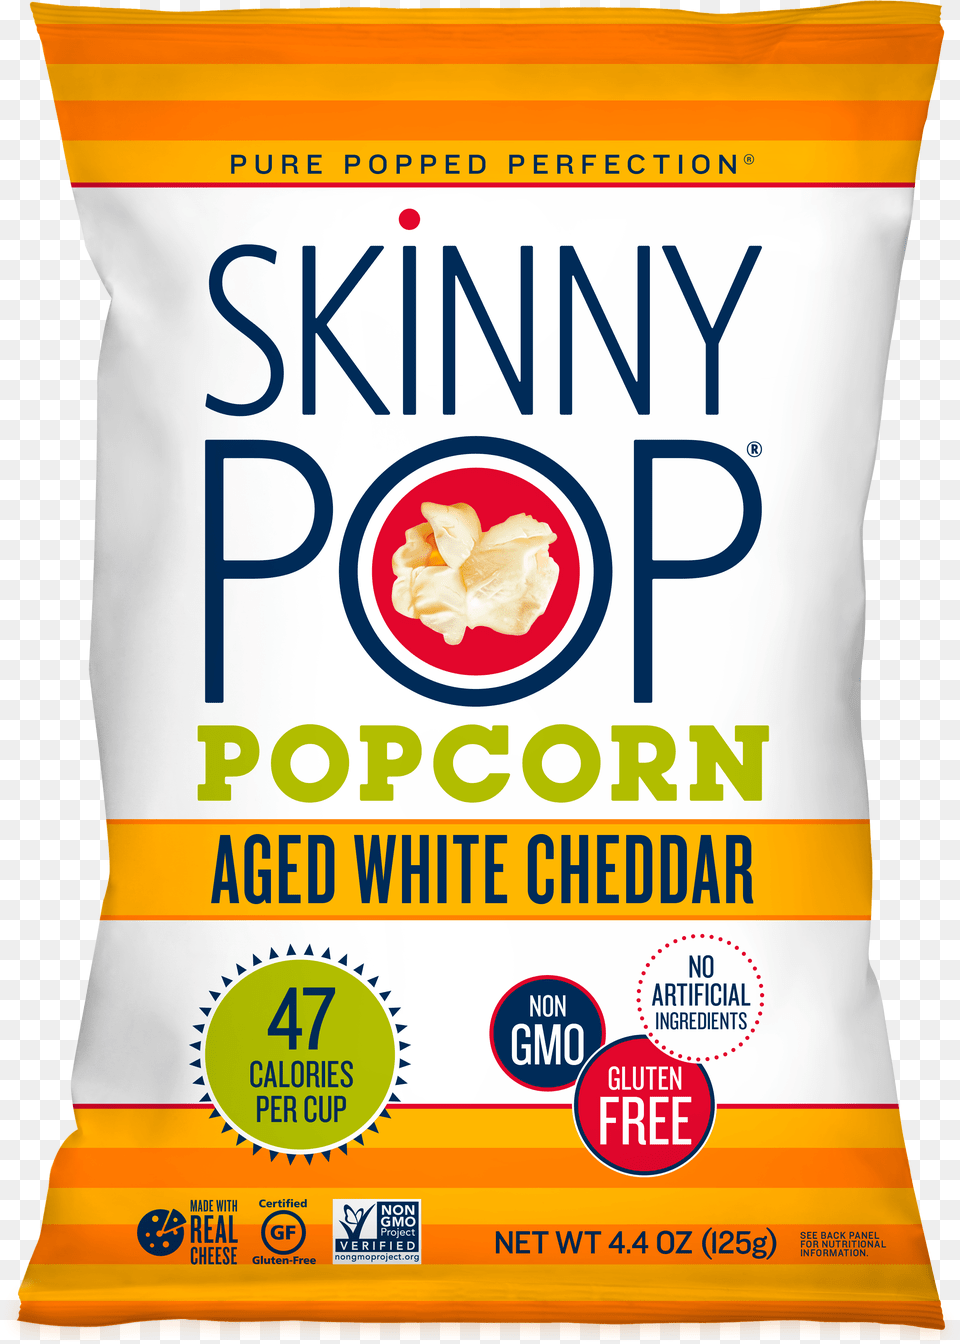 Aged White Cheddar Popcorn Junk Food, Powder, Can, Tin, Flour Free Png Download